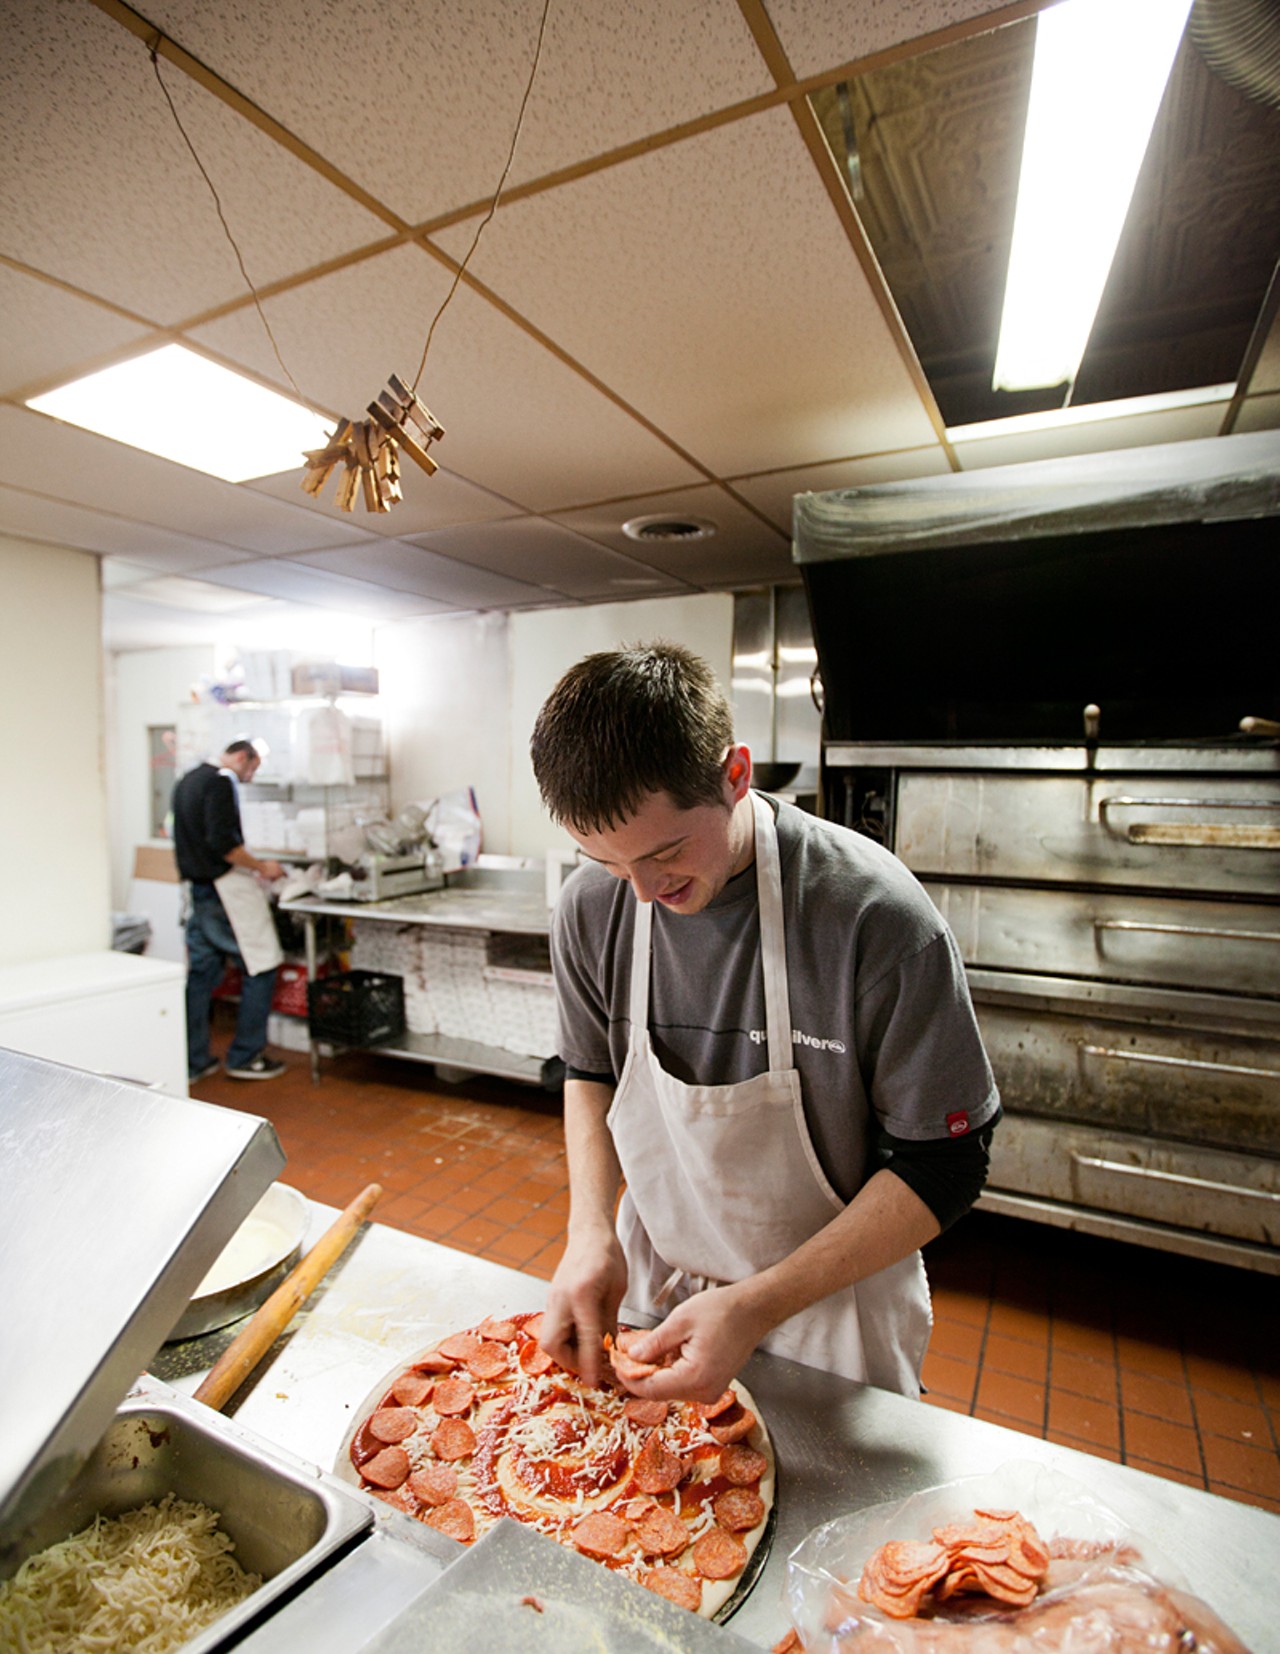 Brother of the owner, Jasmin Islamovic, at work in the kitchen of Mr. X's.